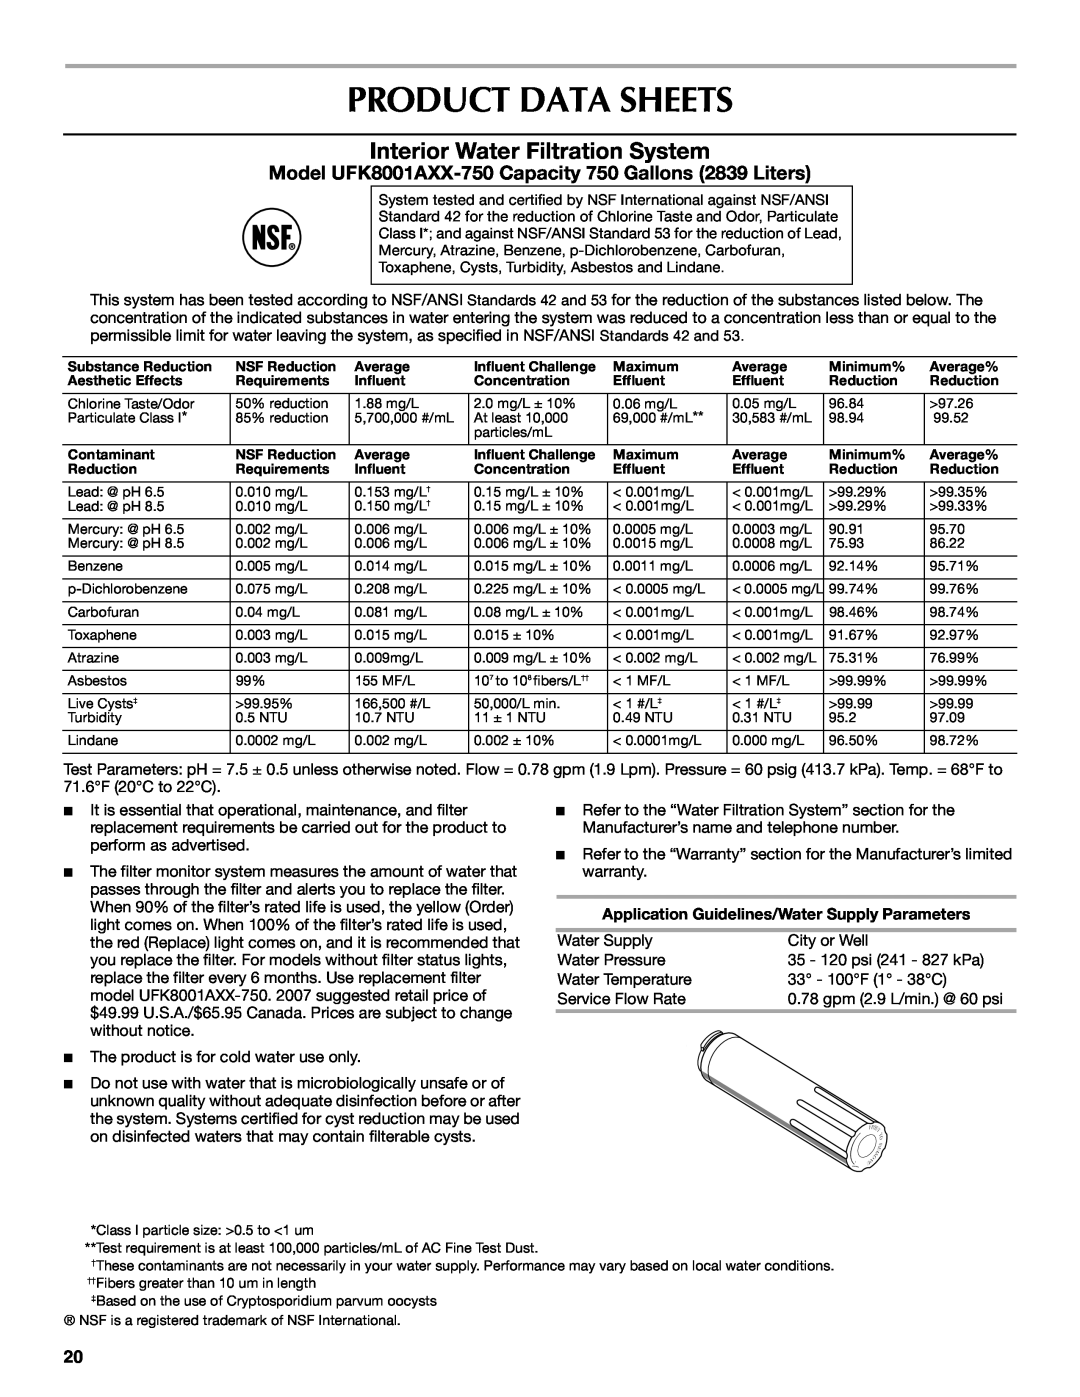 Maytag MBL2556KES Product Data Sheets, Interior Water Filtration System, Application Guidelines/Water Supply Parameters 